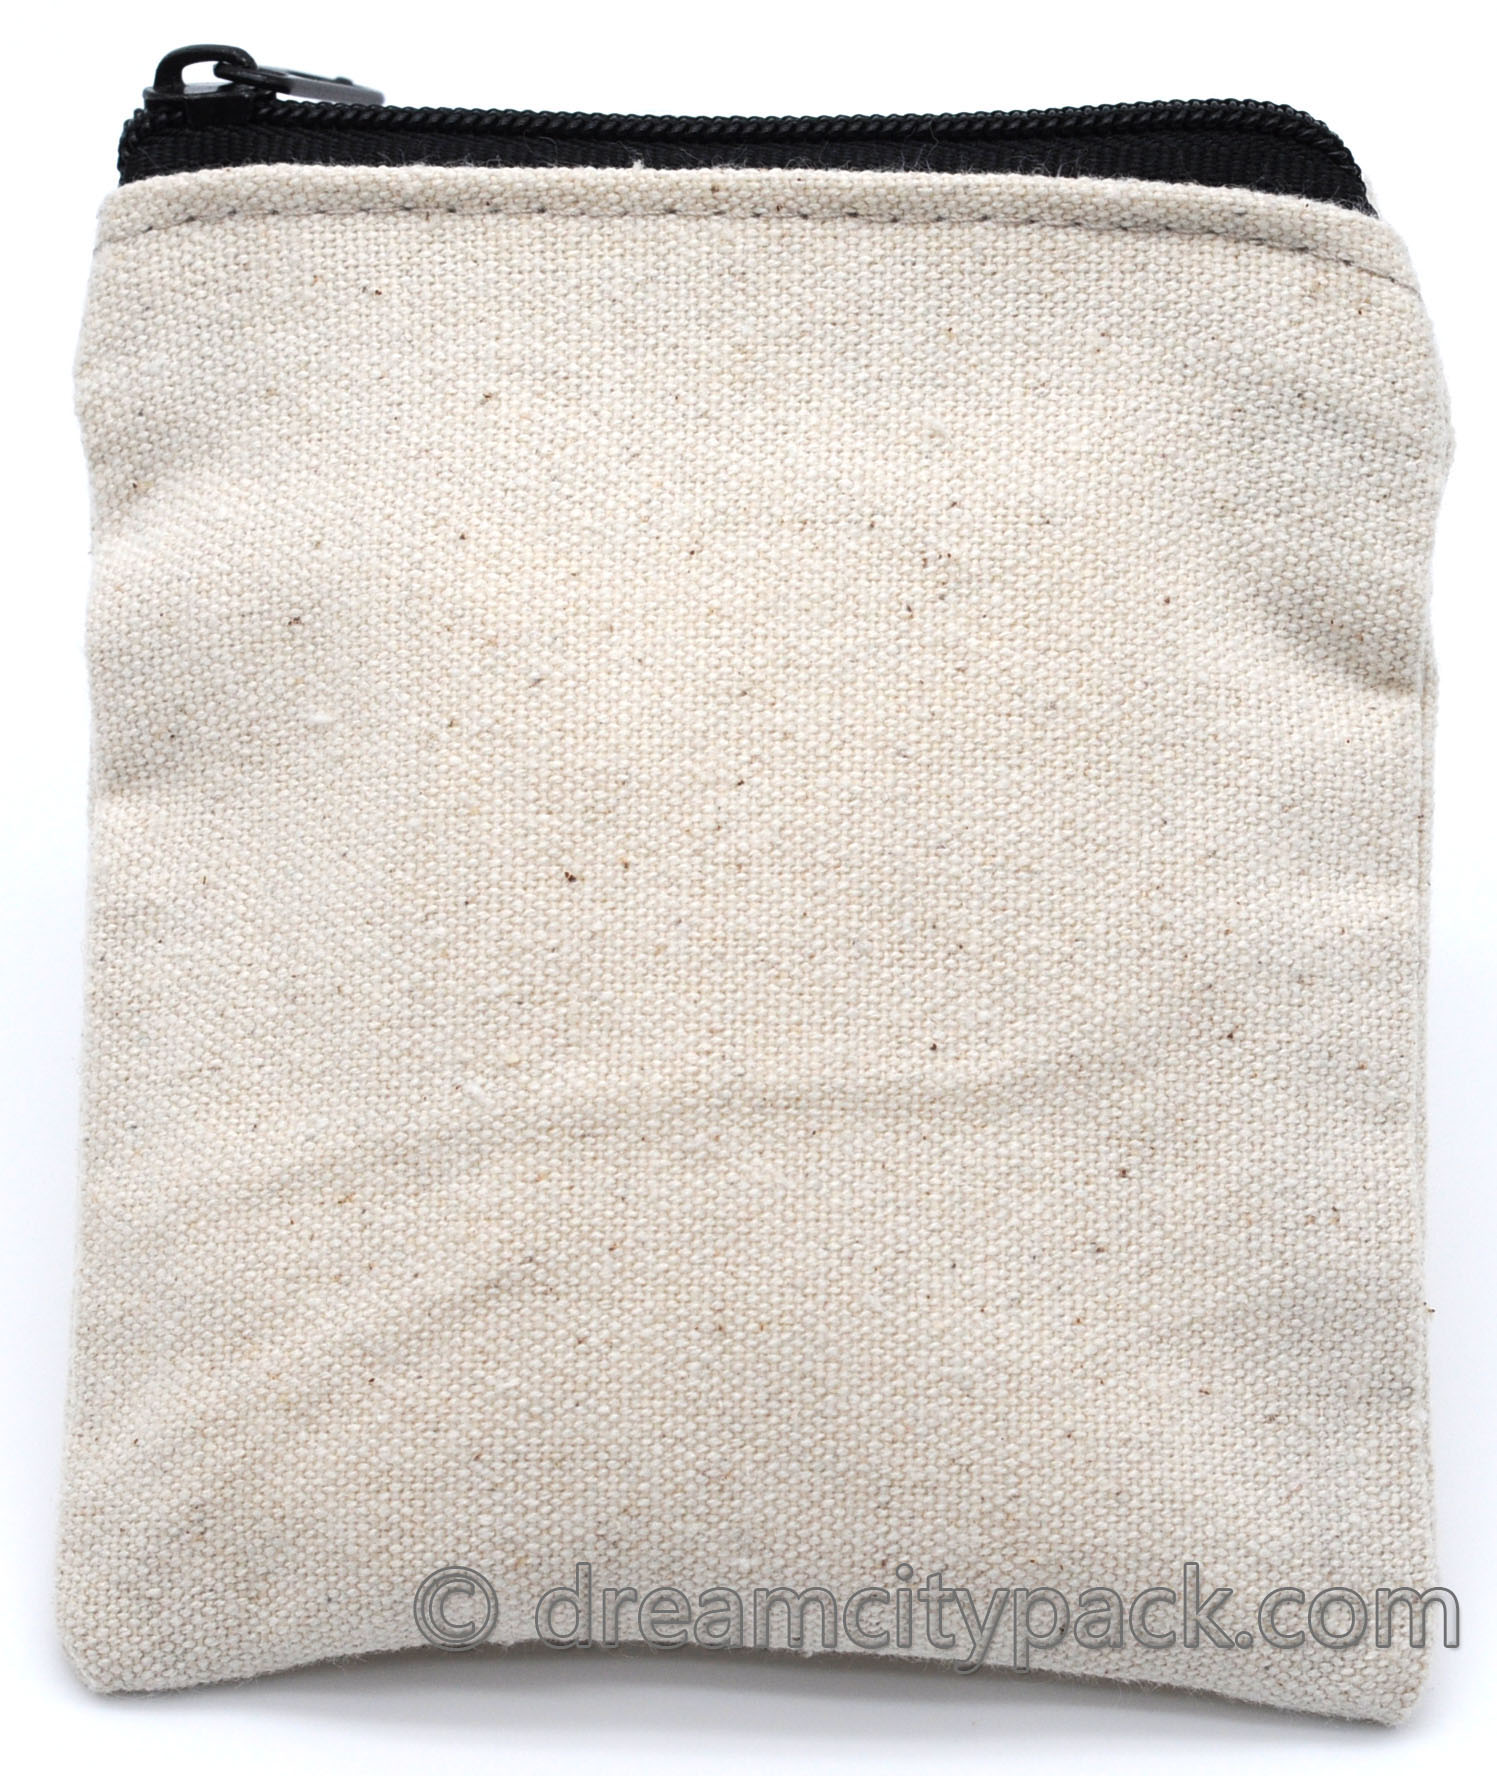 Custom Zippered Canvas Pouch Wholesale